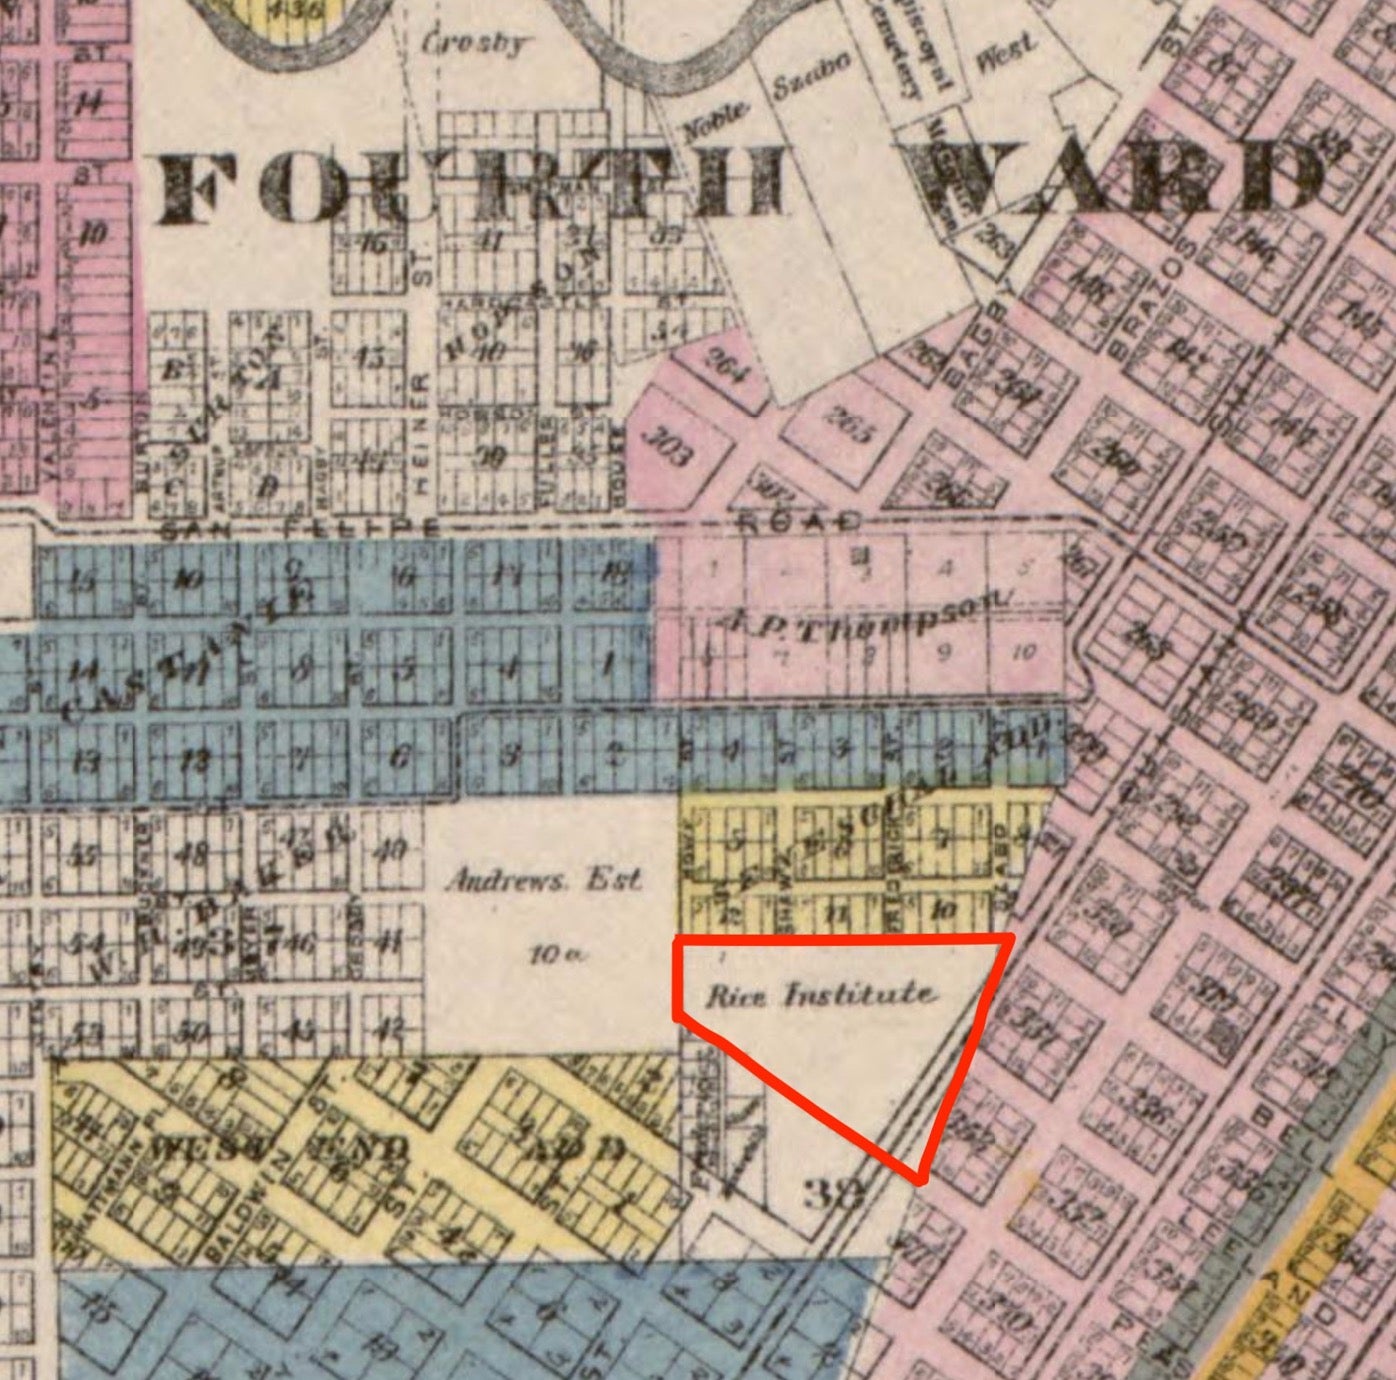 Clipping from an 1895 Map Showing Rice Institute Property in Houston's Fourth Ward